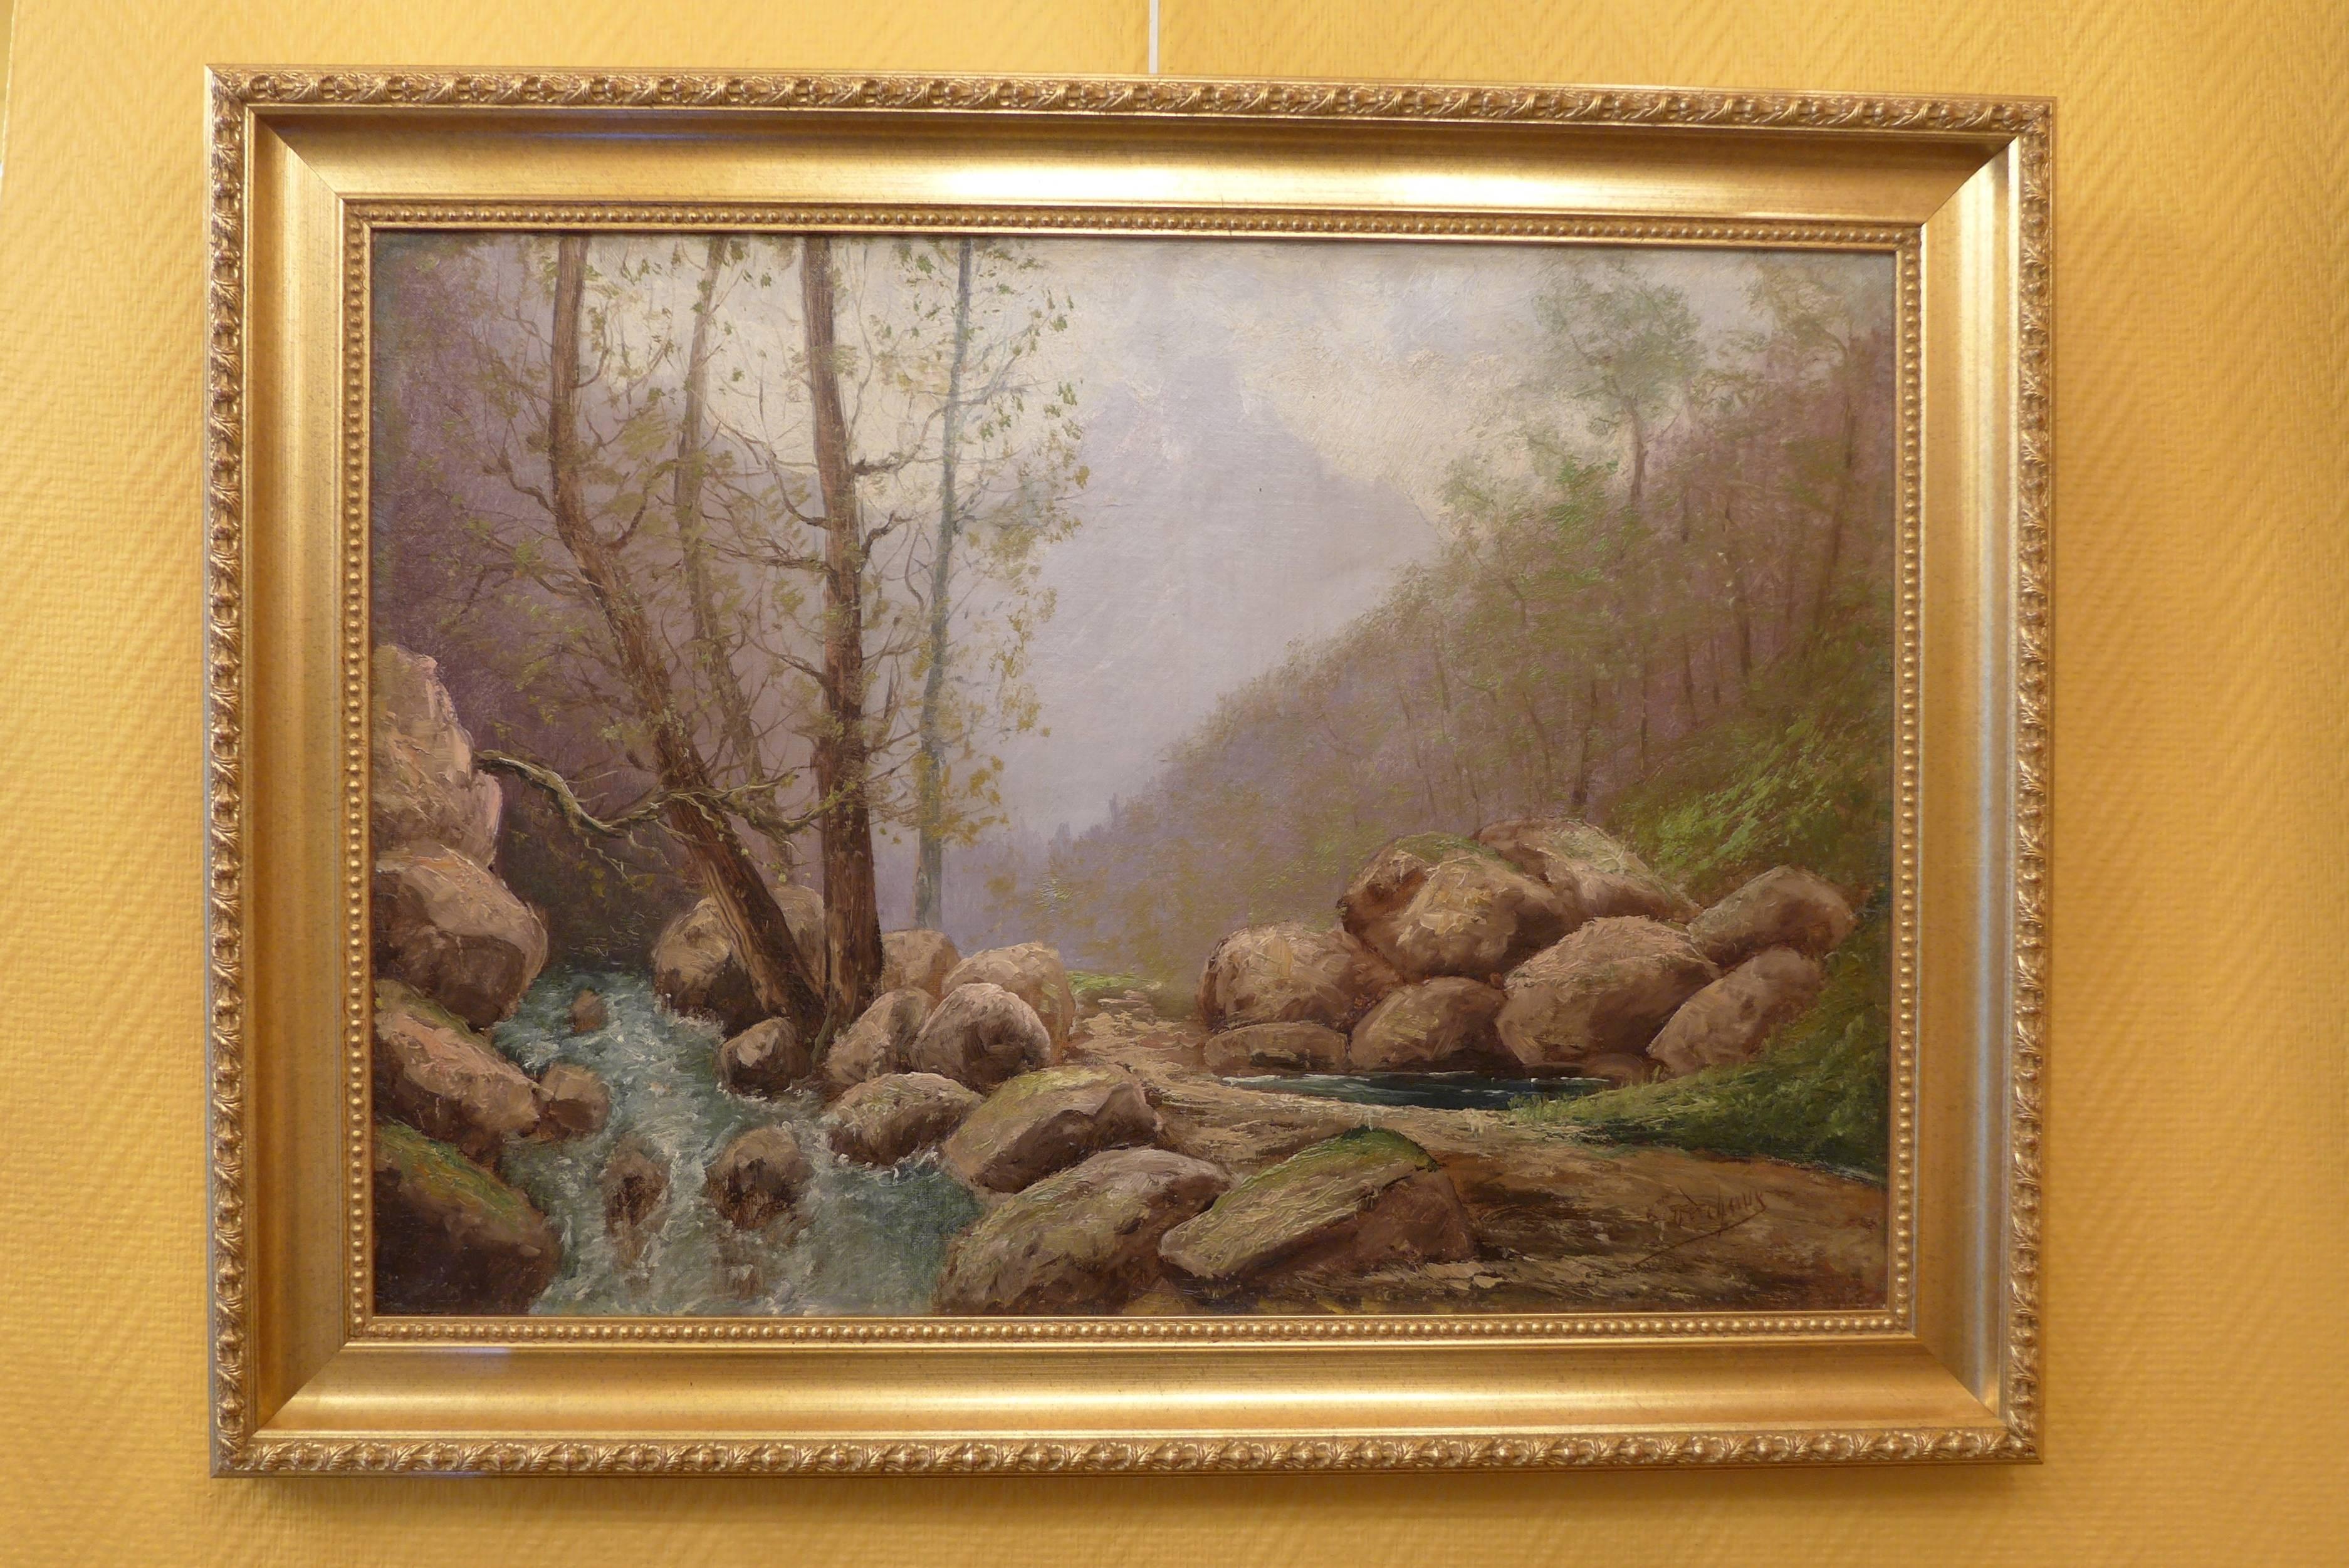 French Mountain stream, oil on canvas signed on the lower right side by Godchaux, circa 1900.

Emile Godchaux: (Bordeaux 1860-1930), was a French landscape painter. 
It appears to be a close relative of Alfred Godchaux (landscape painter) and